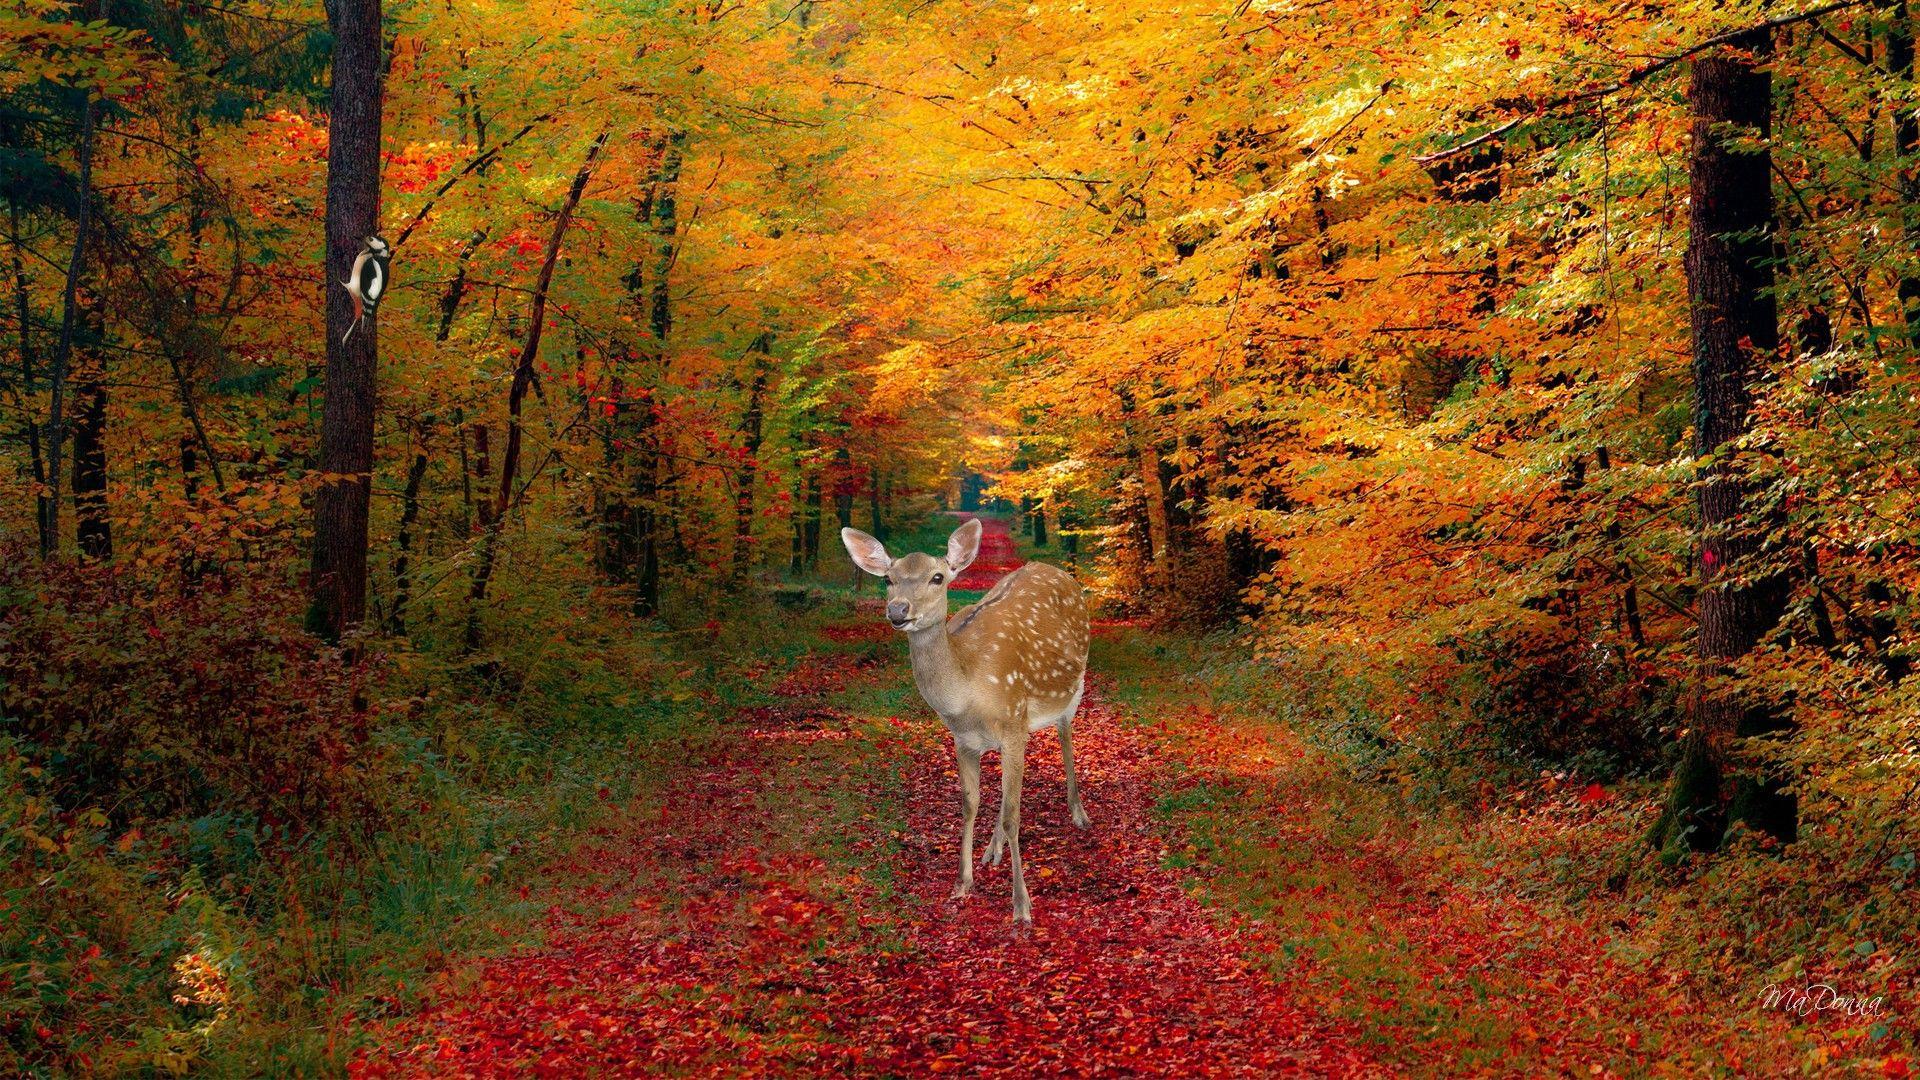 fall picture. Download Autumn Deer wallpaper 225590. Lost in the woods, Fall picture, Autumn leaves wallpaper